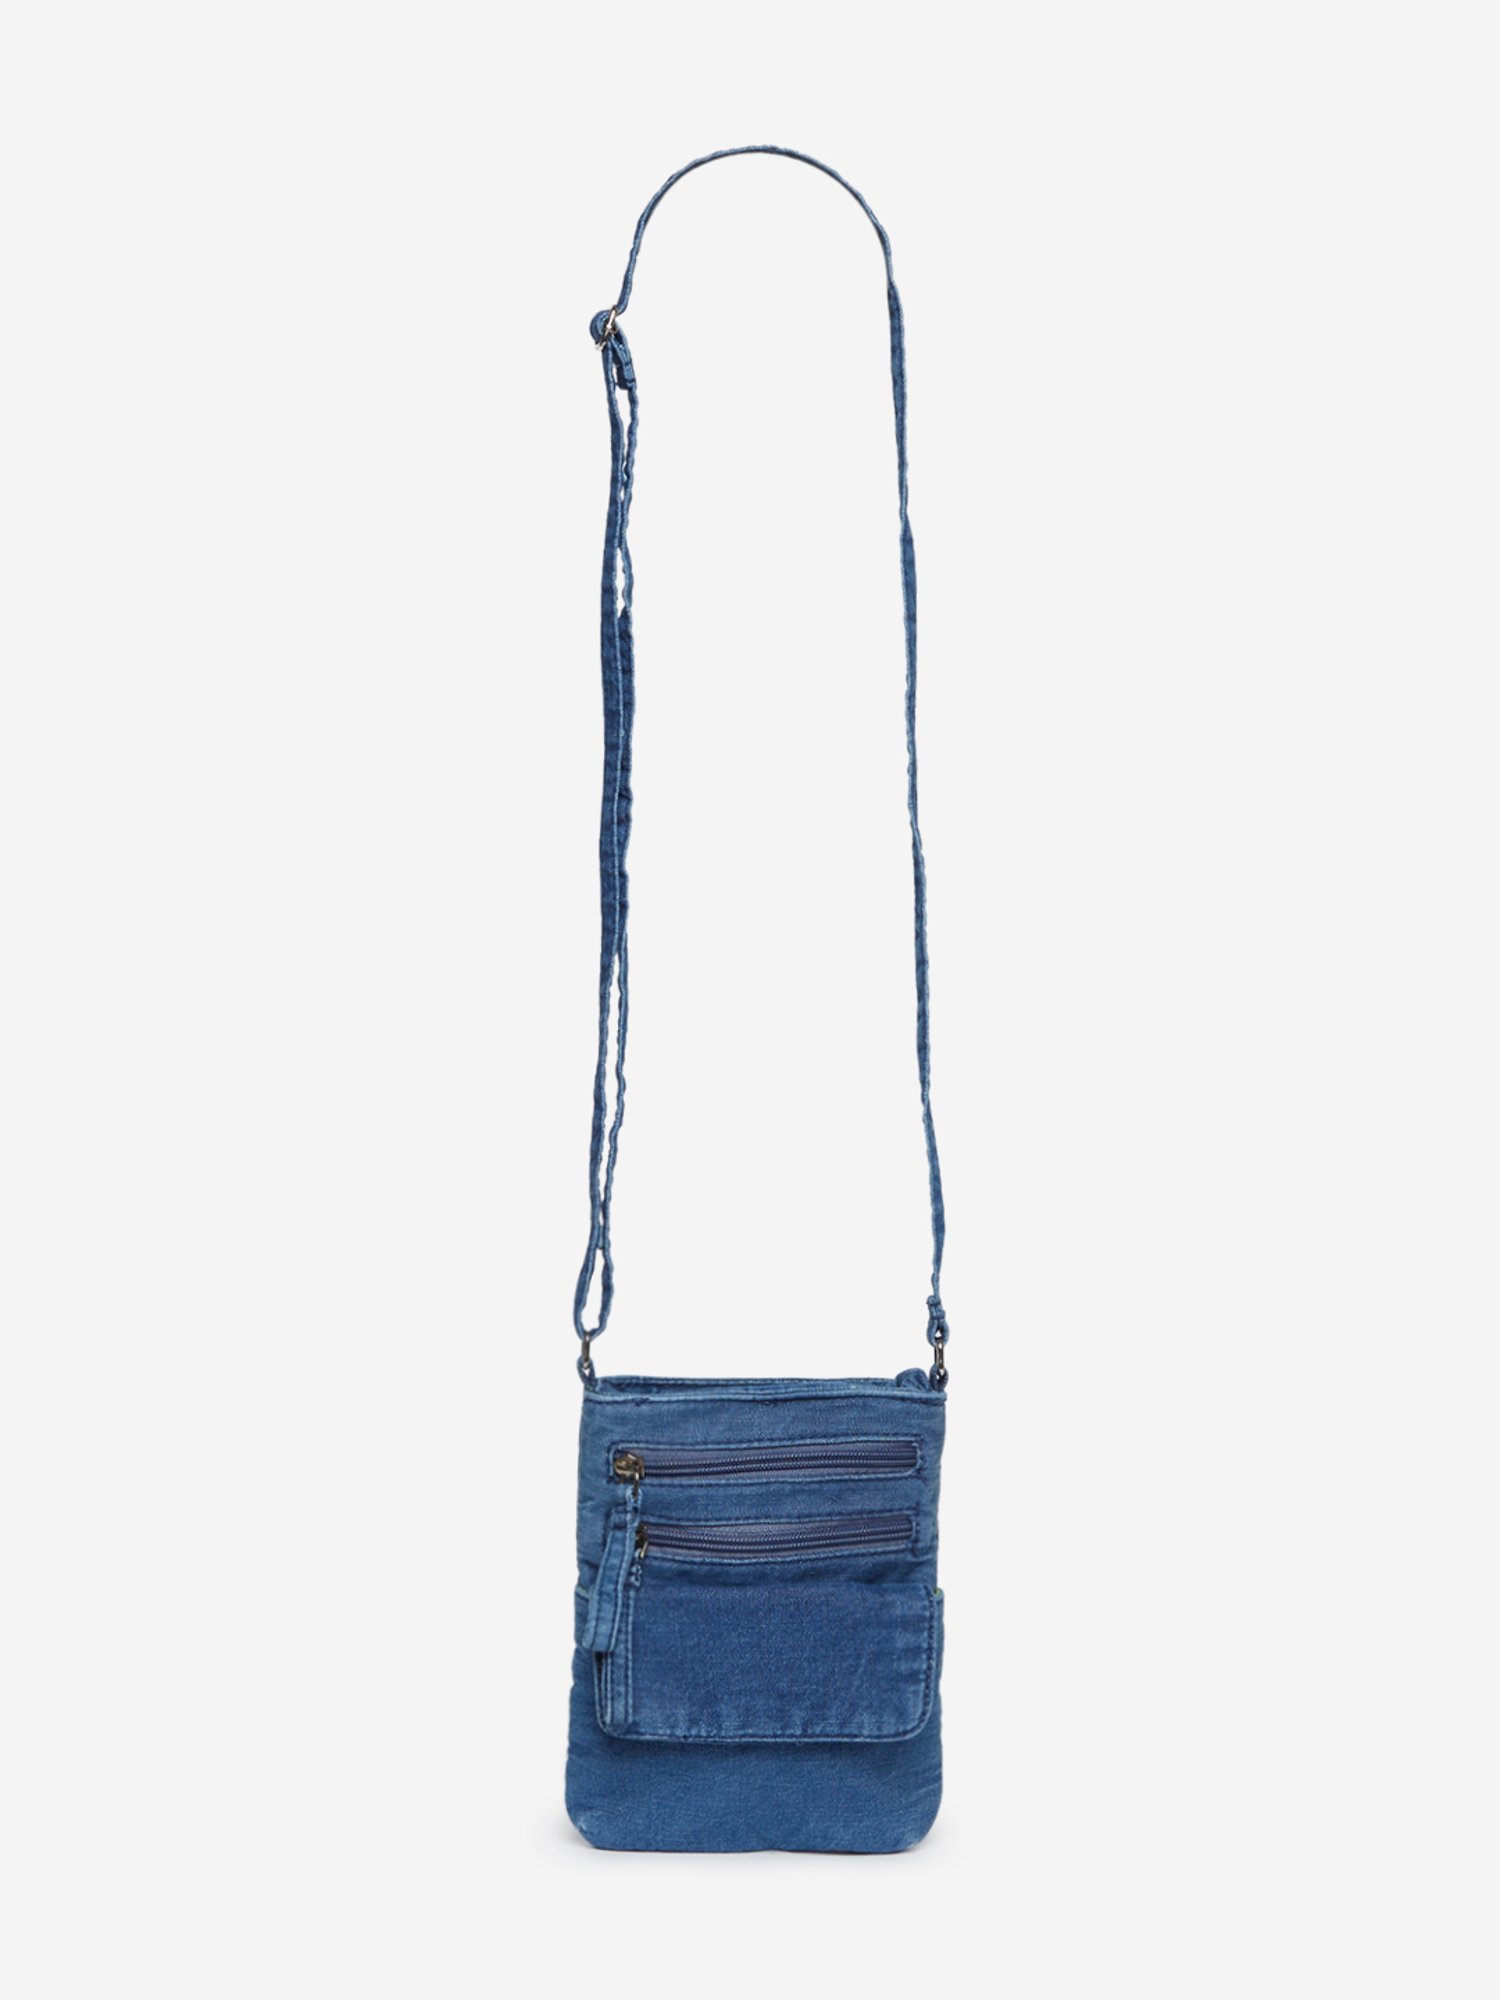 SHOPATHON INDIA Blue Jeans Side Sling Bag For Girls And Womens